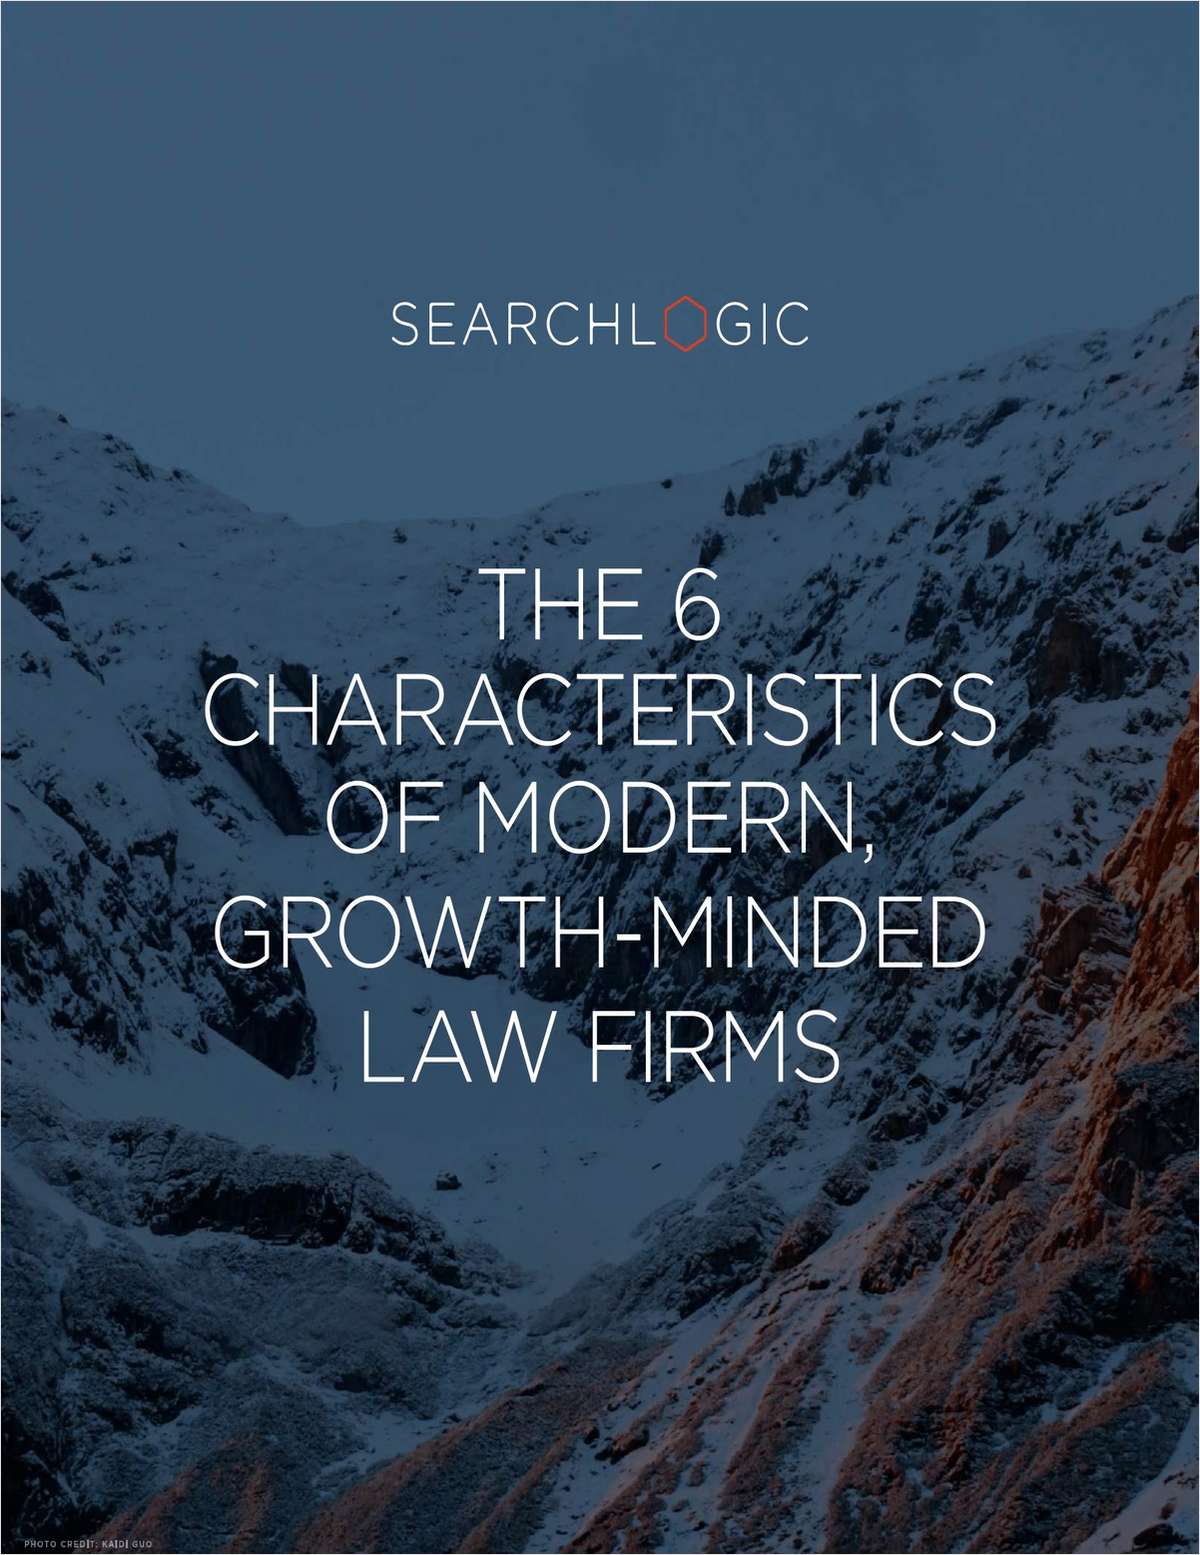 The 6 Characteristics of Modern Growth-Minded Law Firms